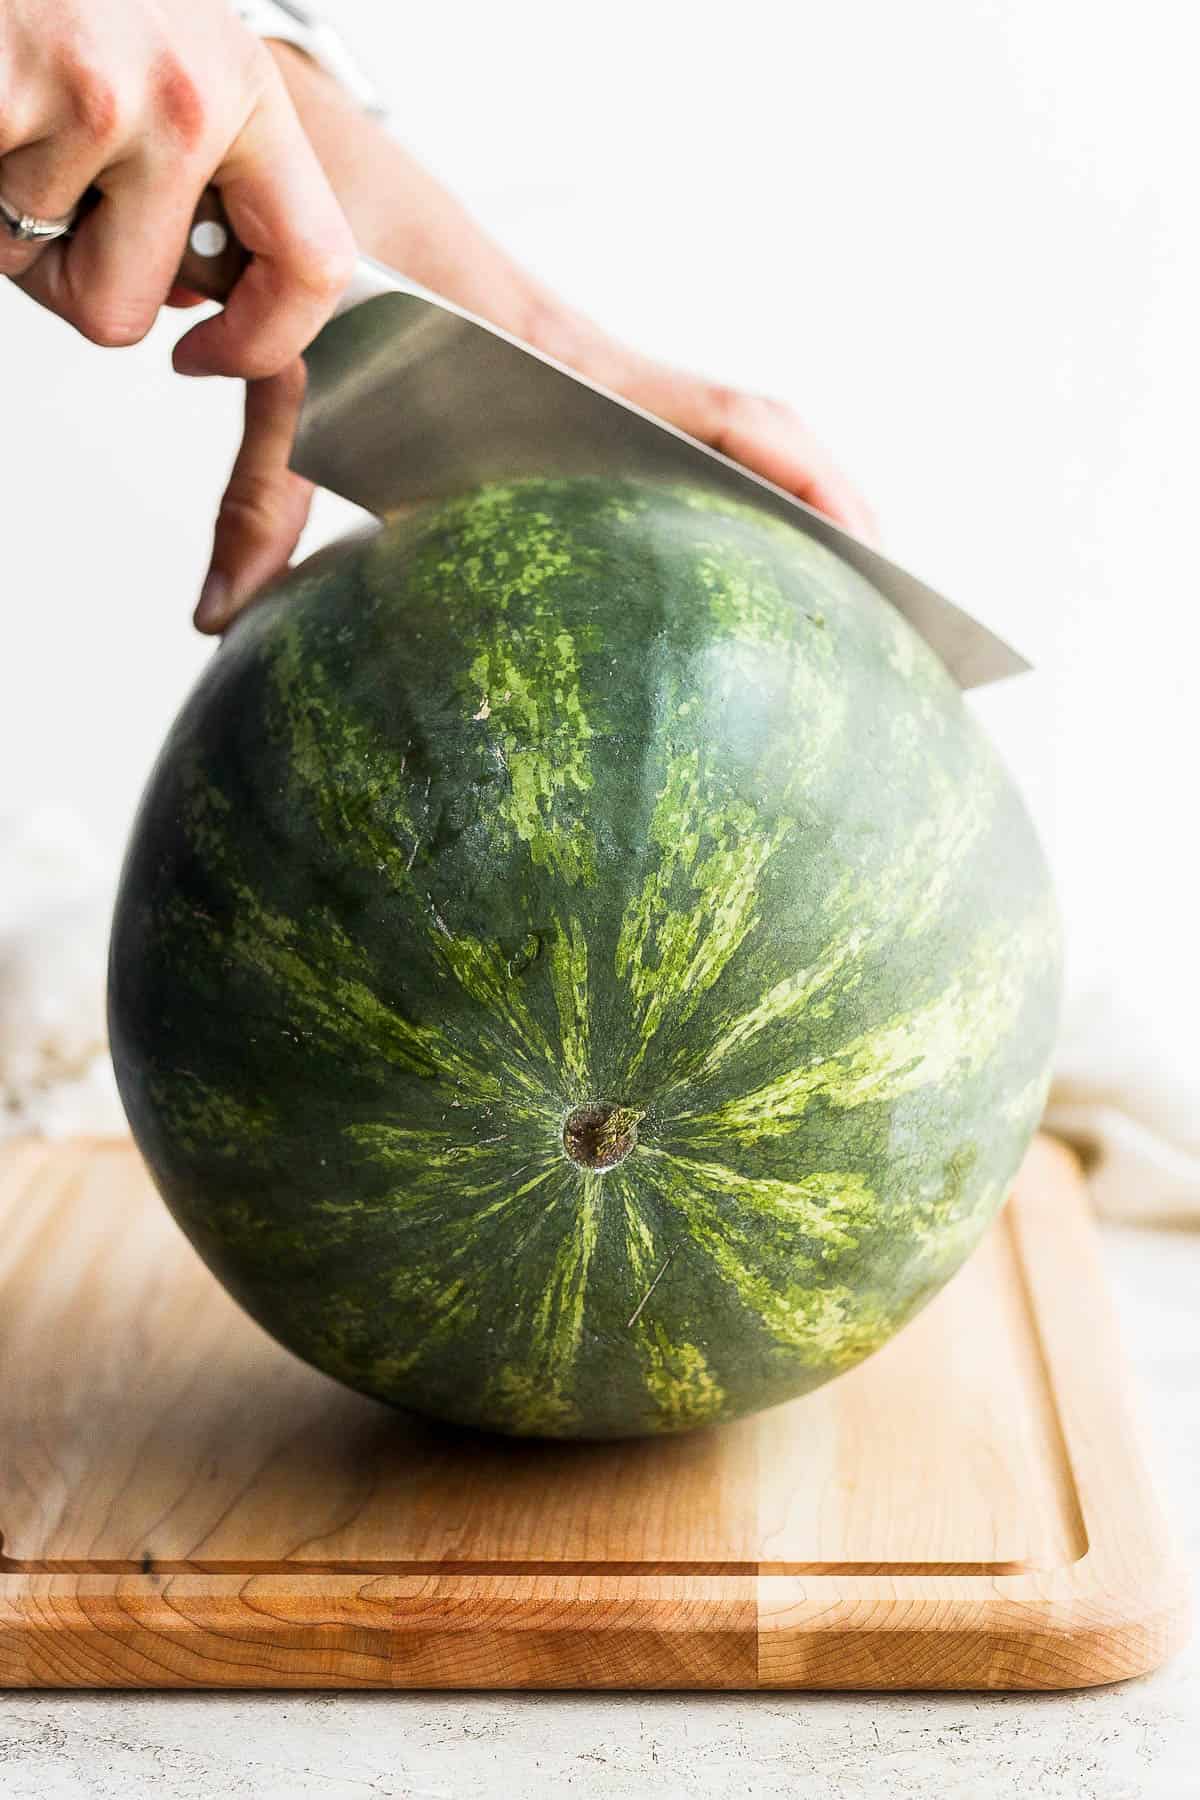 A whole watermelon being cut in half across the middle.